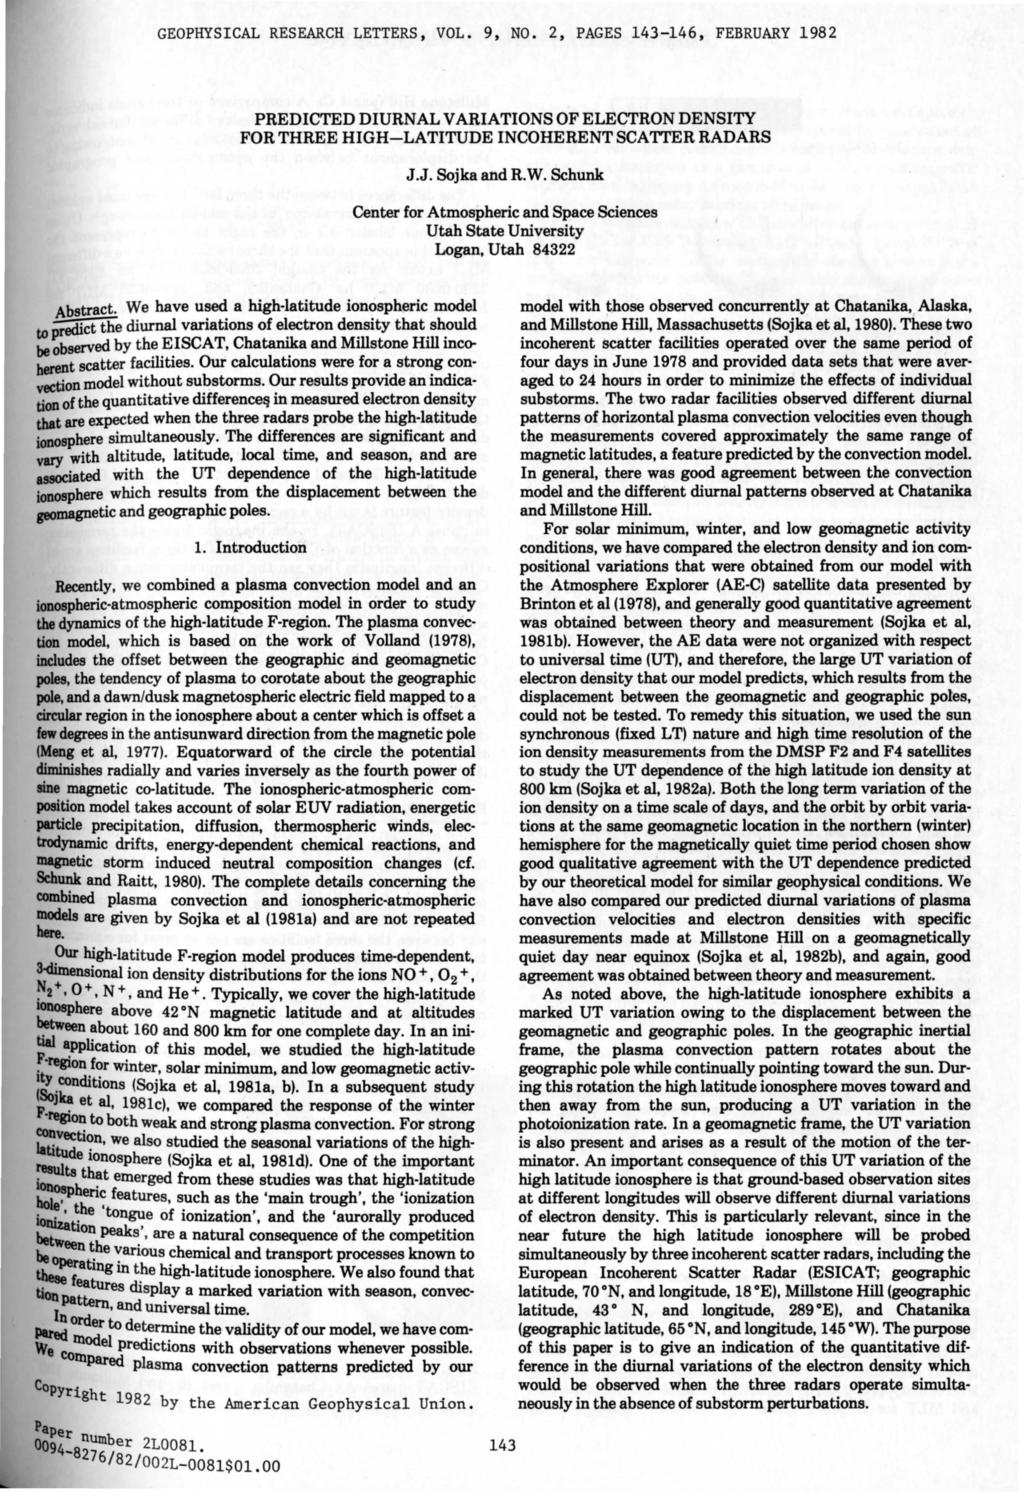 GEOPHYSICAL RESEARCH LETTERS, VOL. 9, NO.2, PAGES 143-146, FEBRUARY 1982 PREDICTED DIURNAL VARIATIONS OF ELECTRON DENSITY FOR THREE HIGH-LATITUDE INCOHERENT SCATTER RADARS J.J. Sojka and R.W.